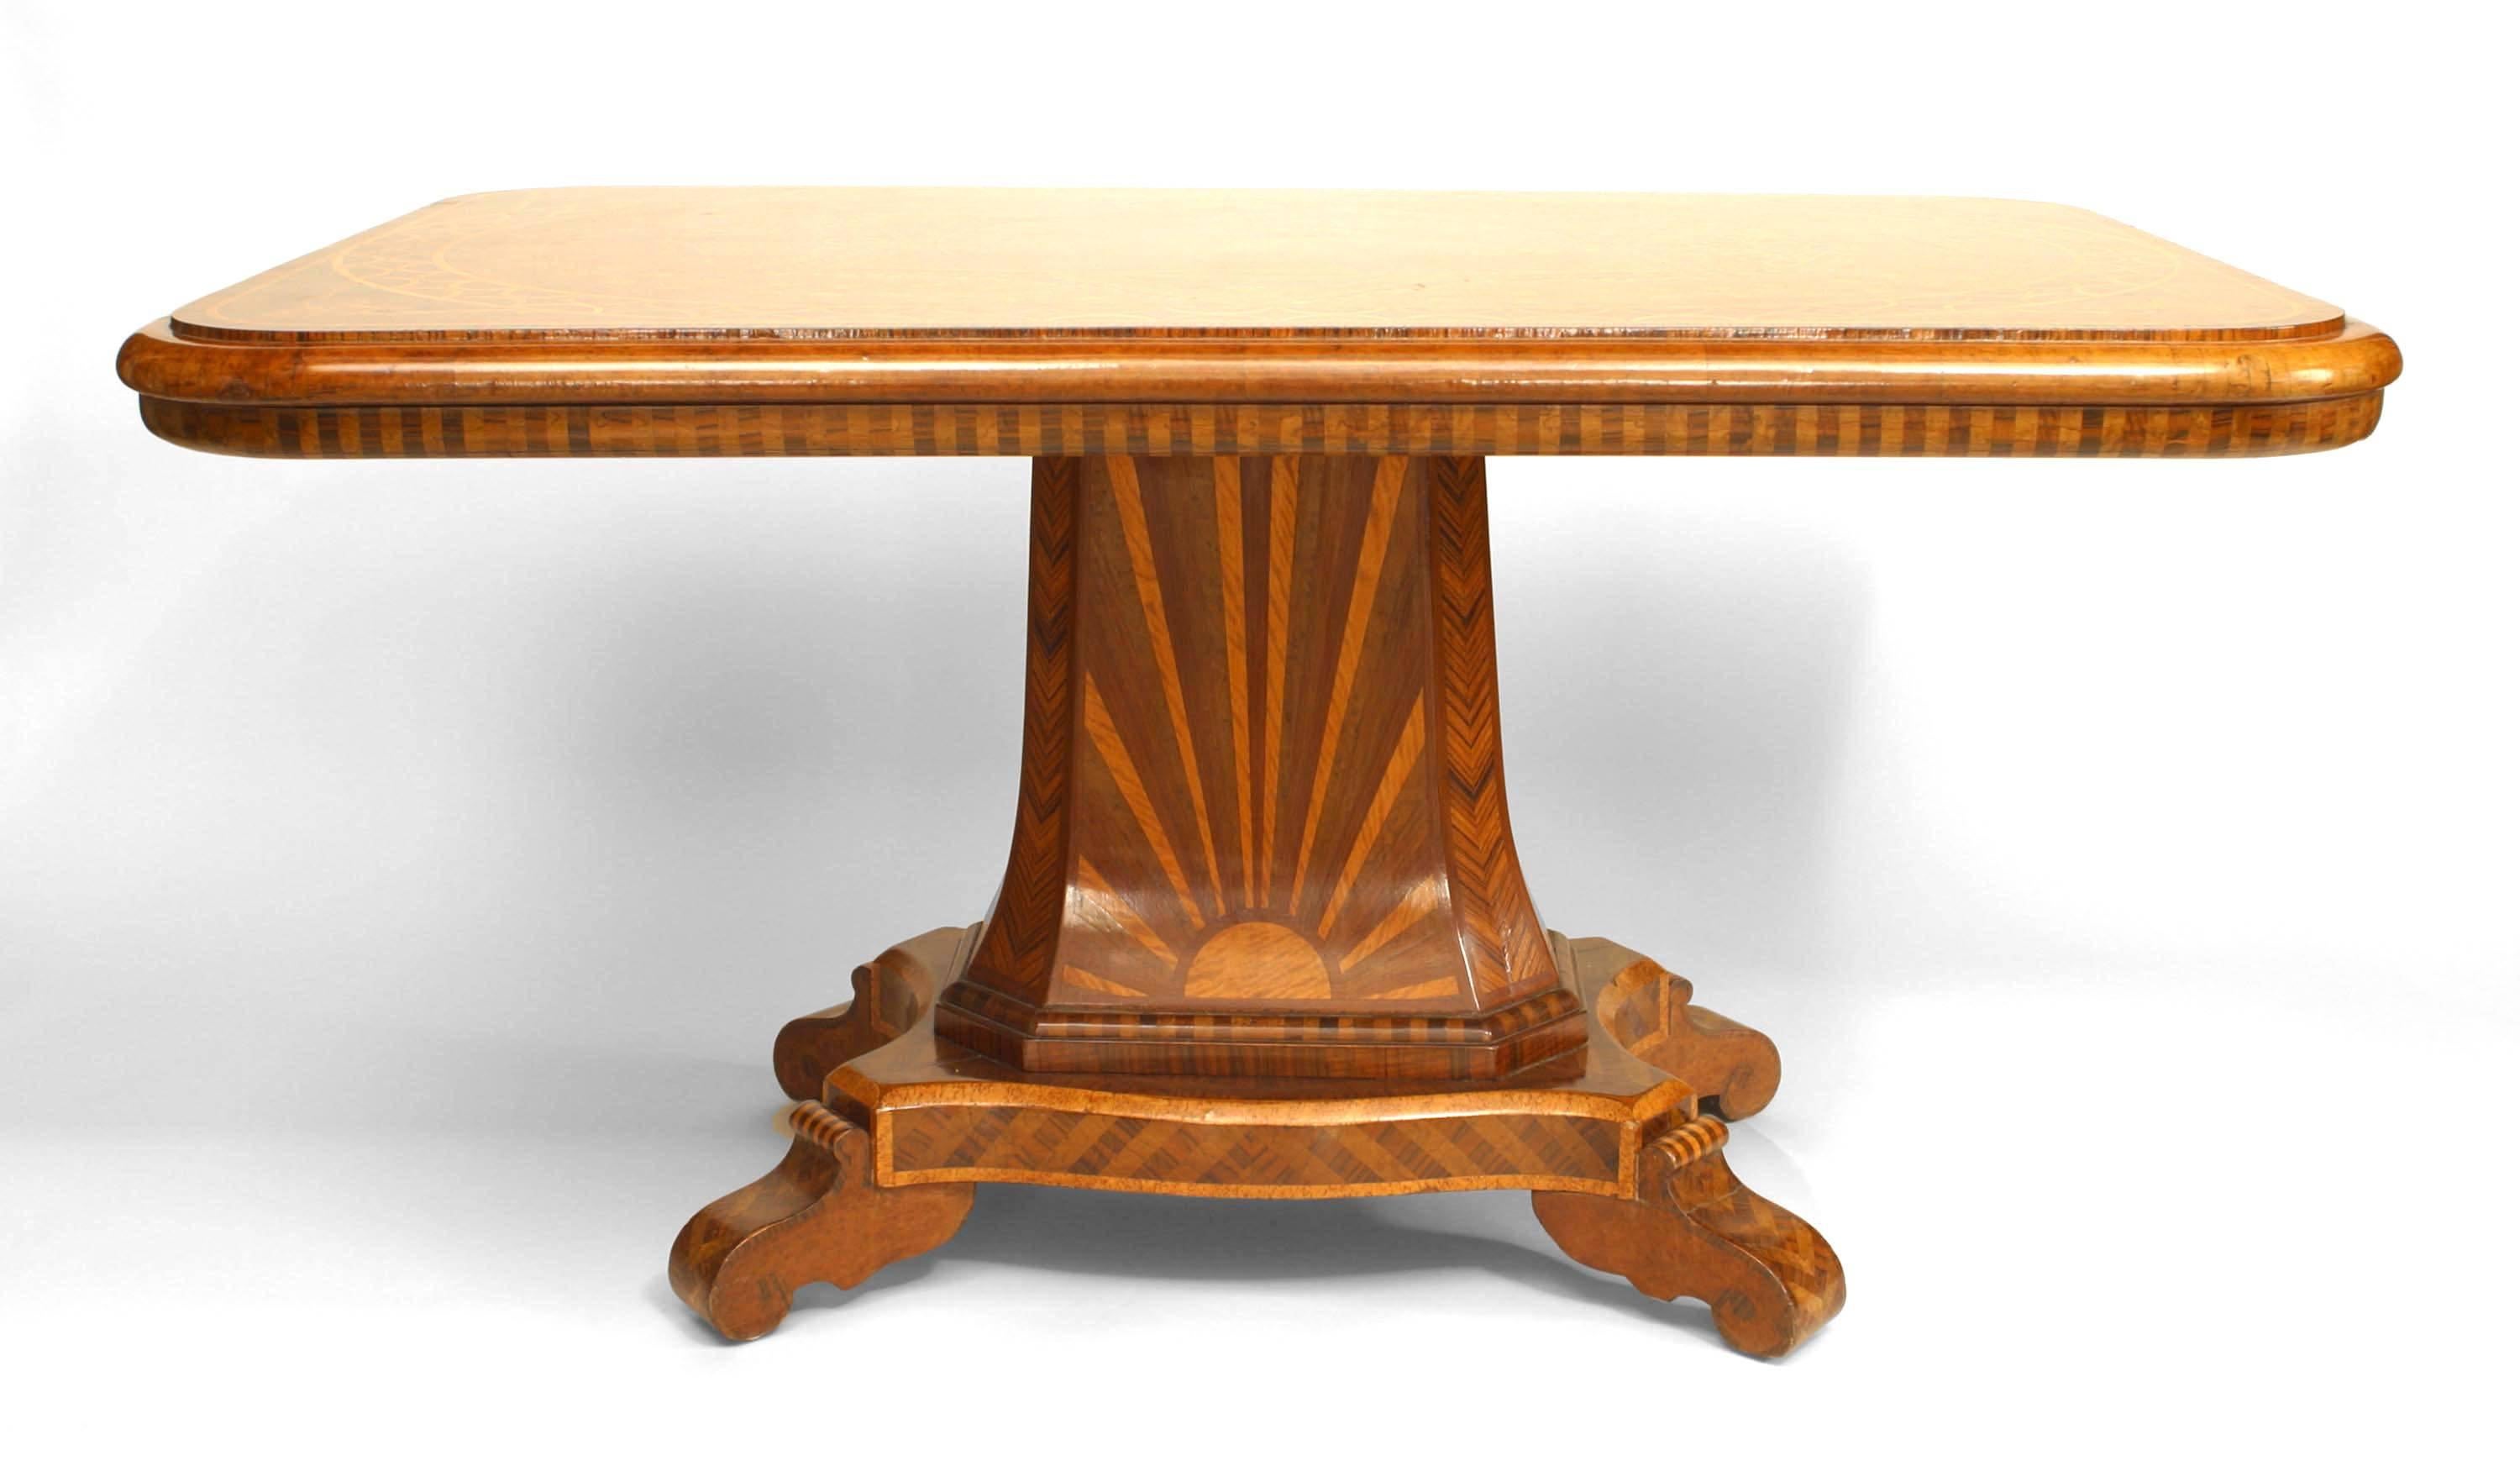 Continental German (circa 1825) rectangular pedestal base center table inlaid with various woods and top with an urn design within a border.
